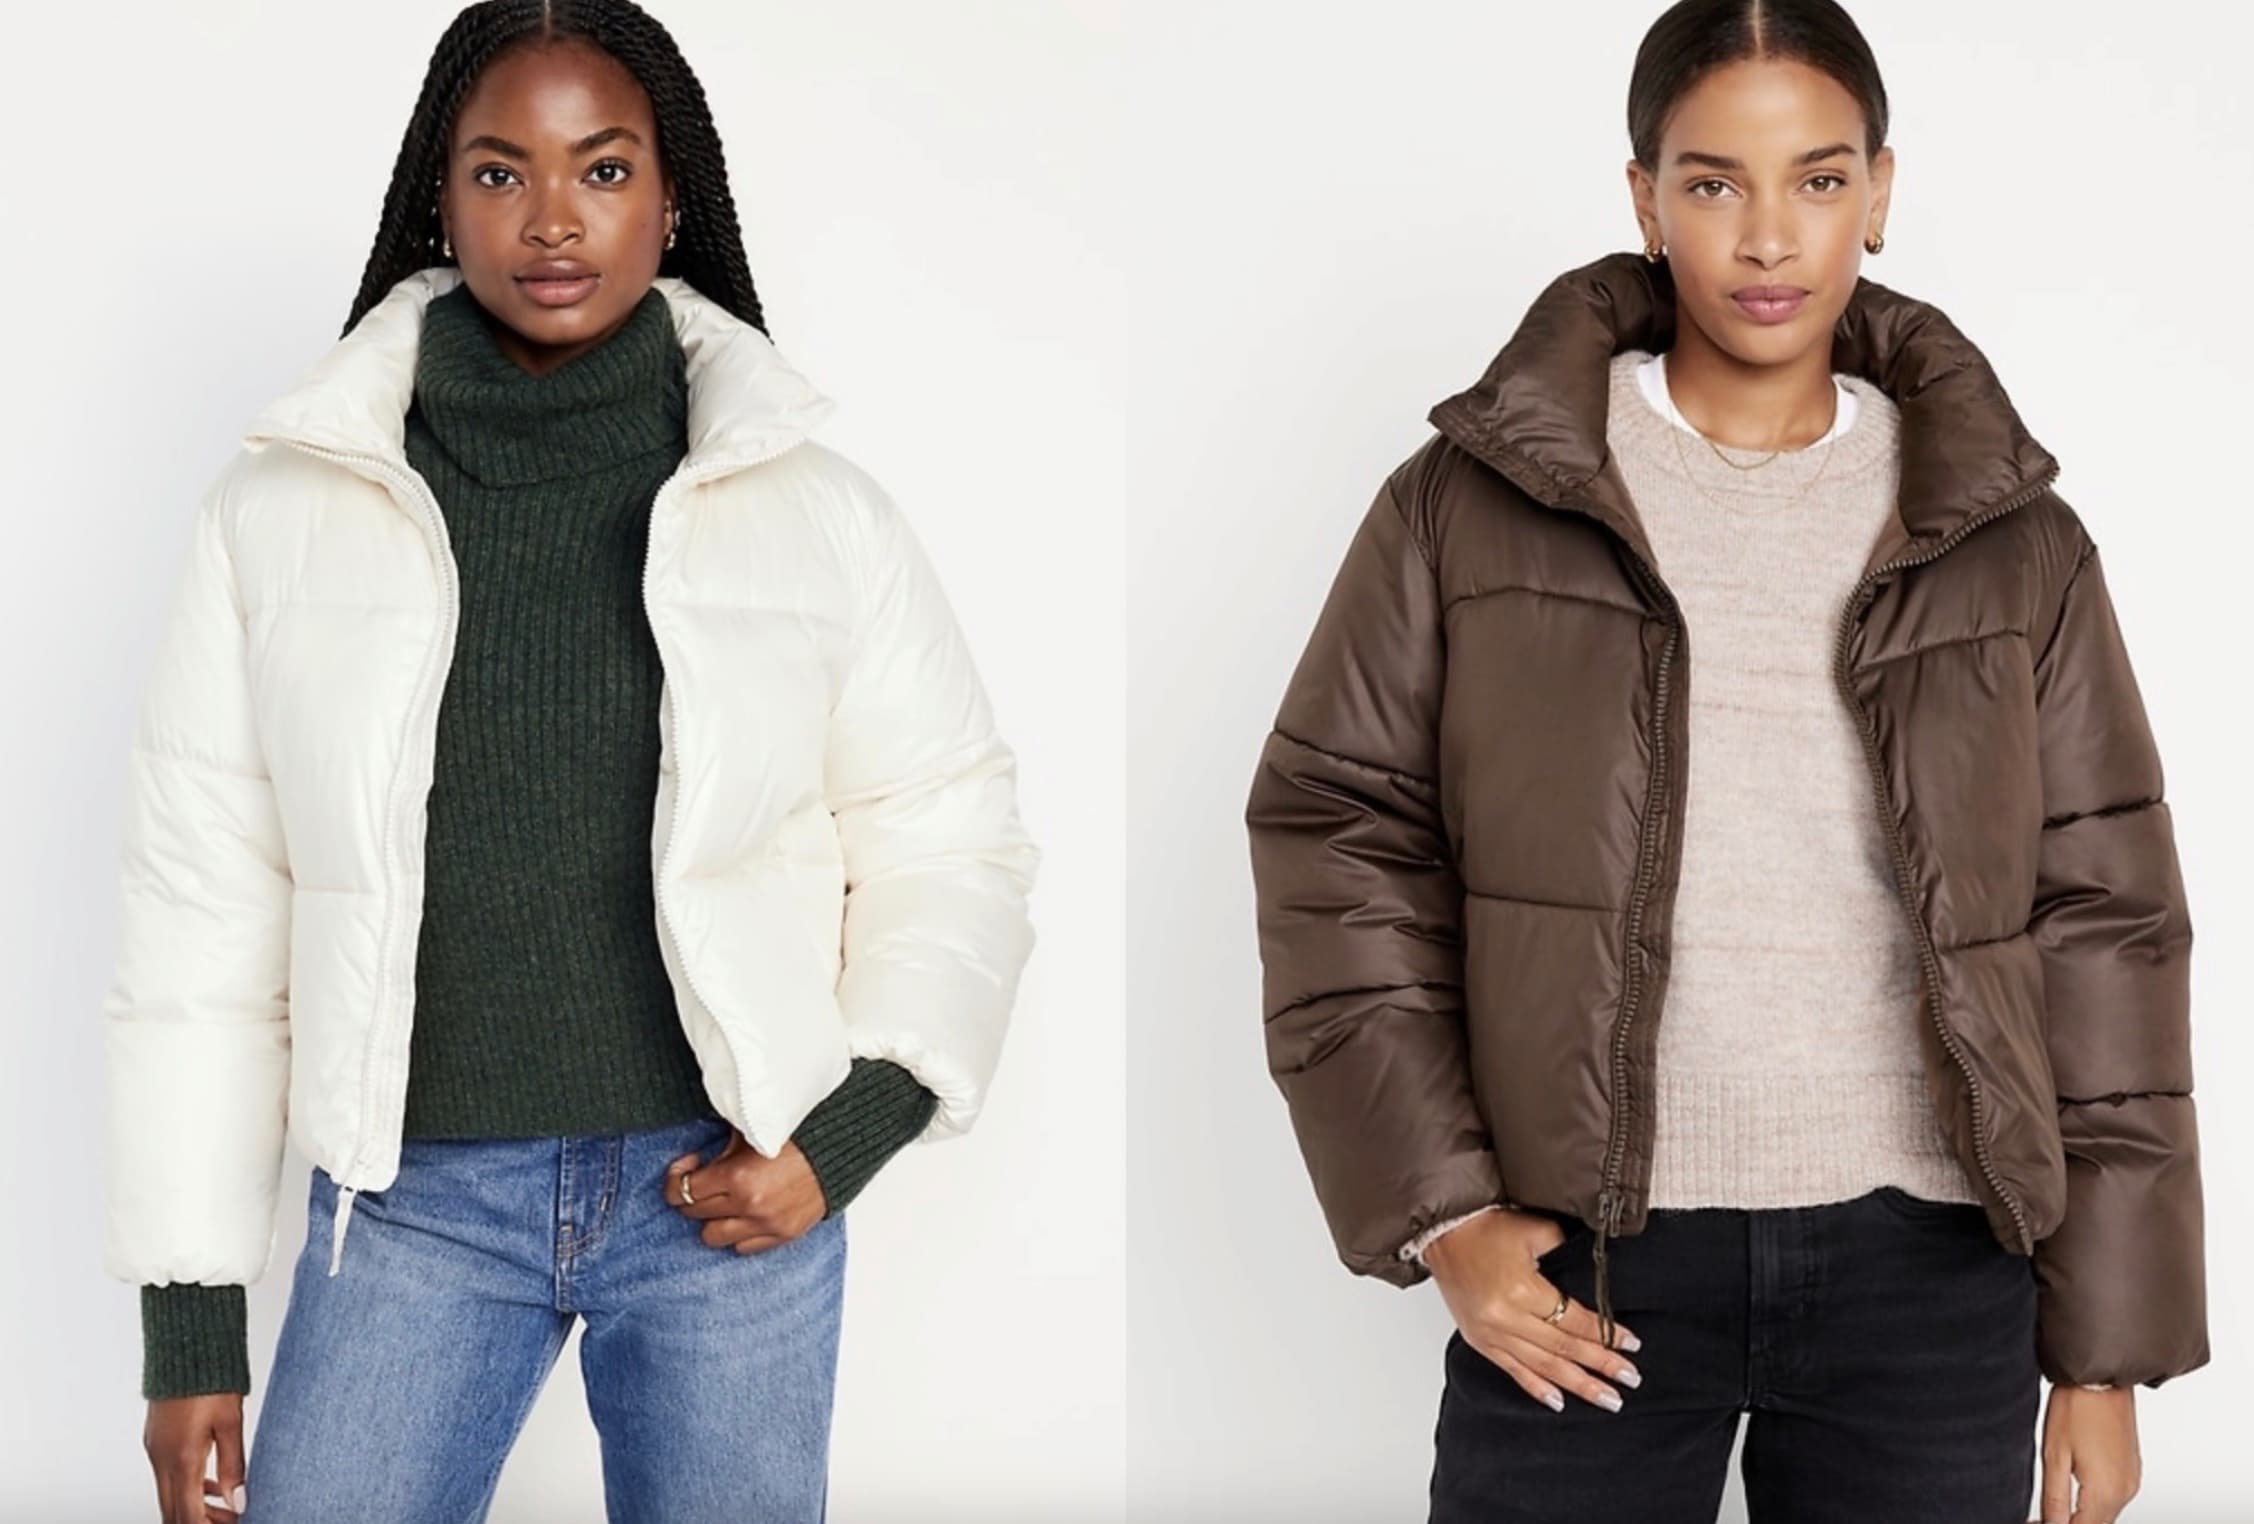 Women’s Puffer Jackets only $24 at Old Navy Today!